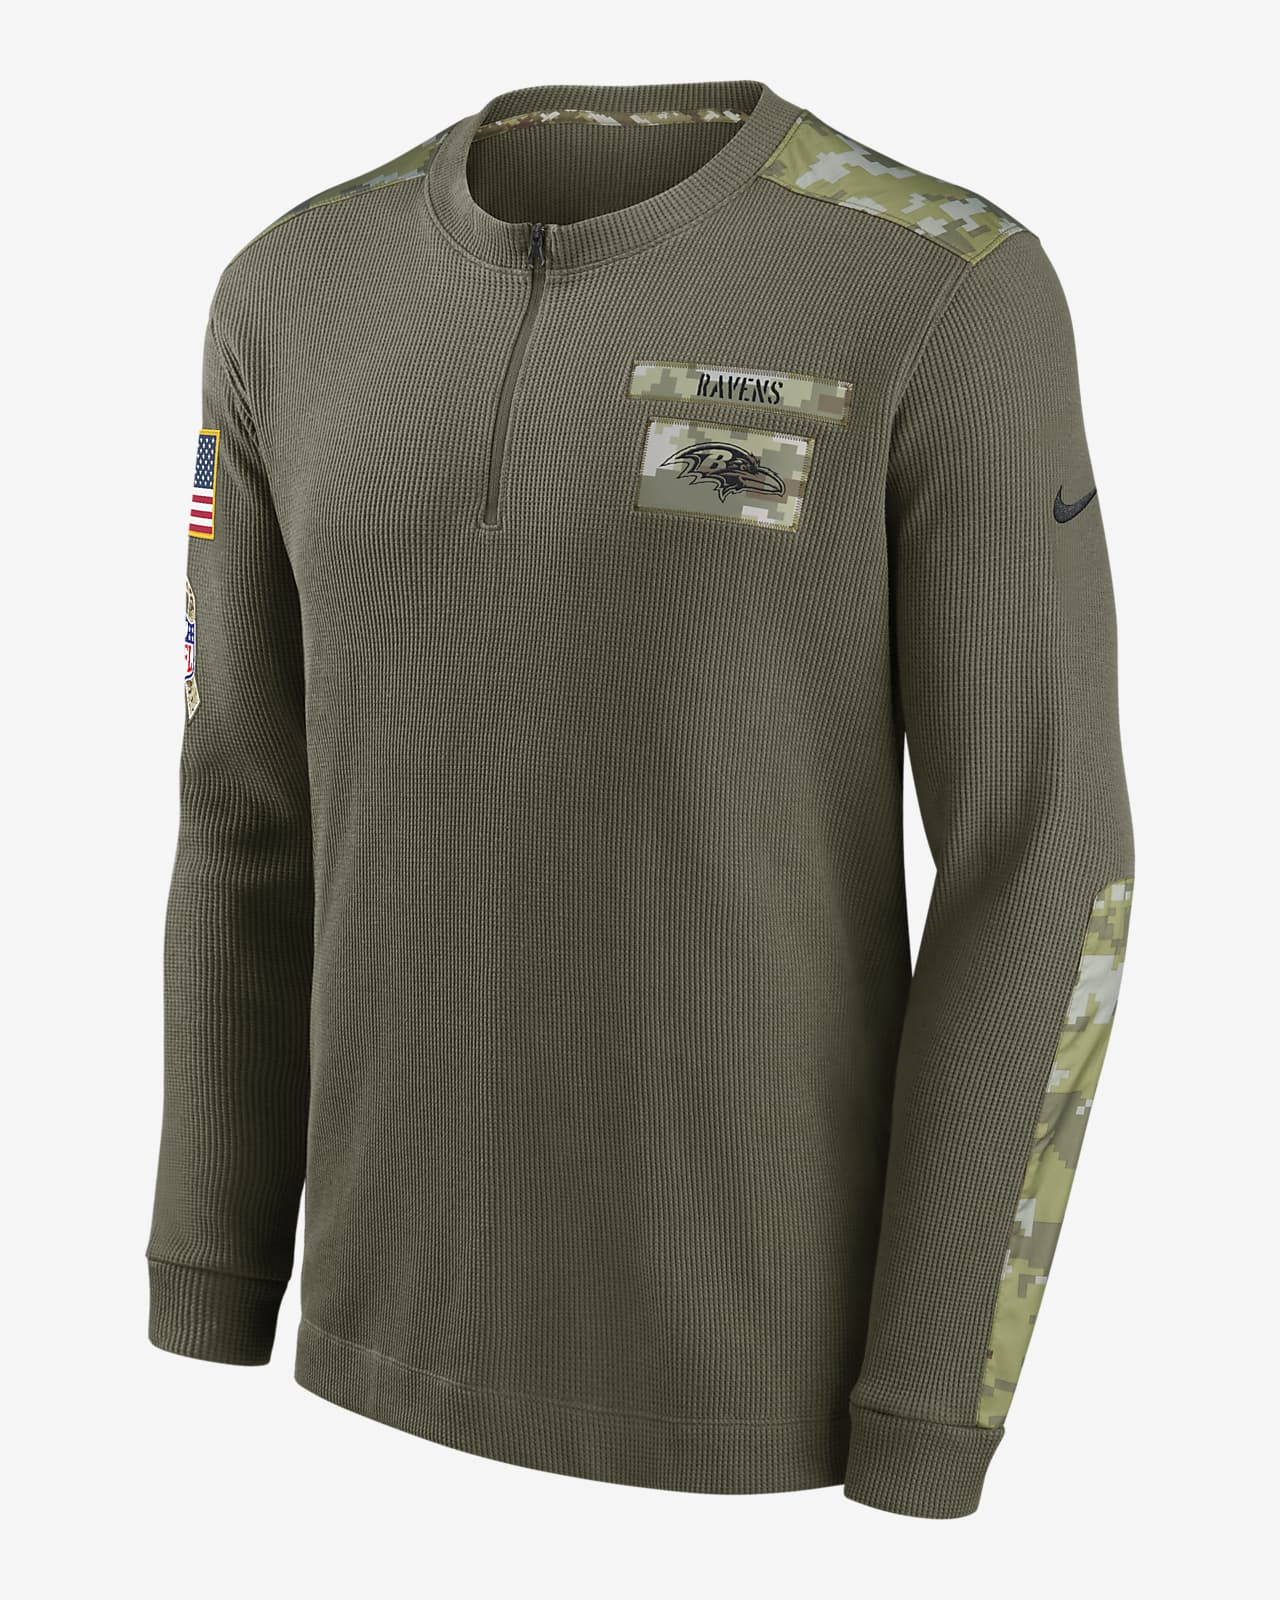 Nike Dri-FIT Salute to Service (NFL Baltimore Ravens) Men's Thermal Long-Sleeve Top